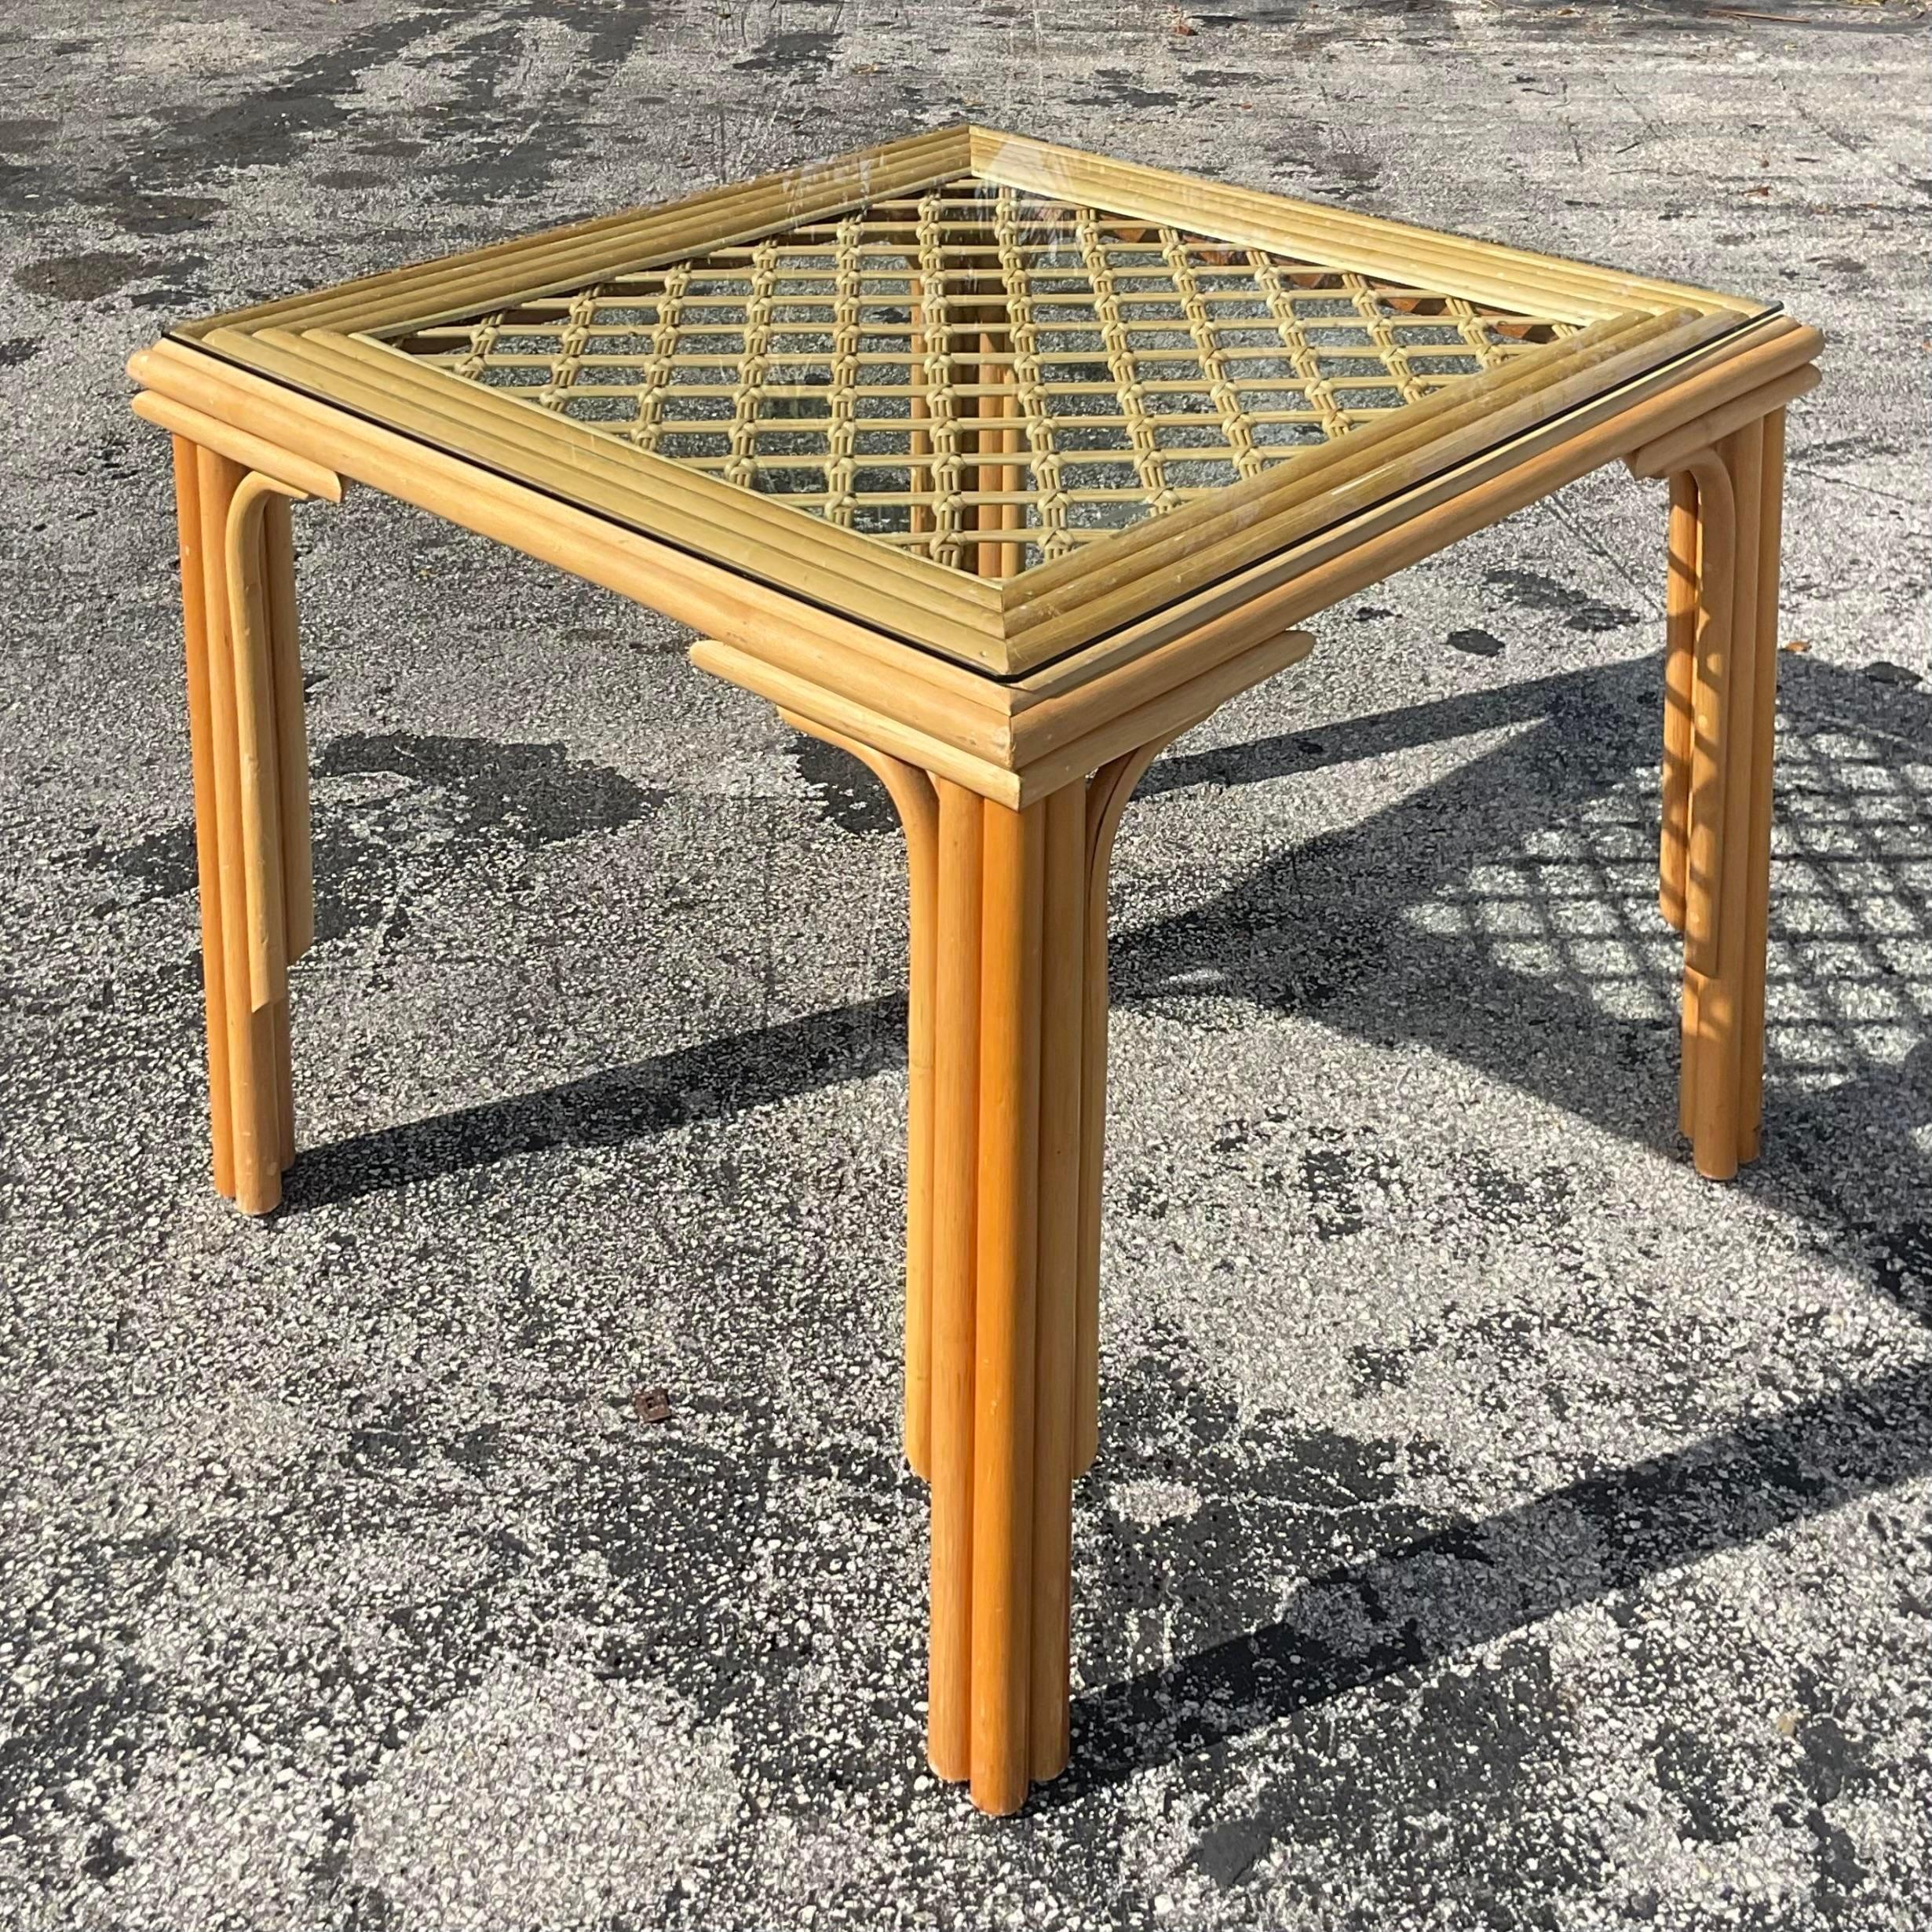 A gorgeous vintage game table made out of rattan and bamboo with a glass top. Acquired at a Palm Beach Estate. 